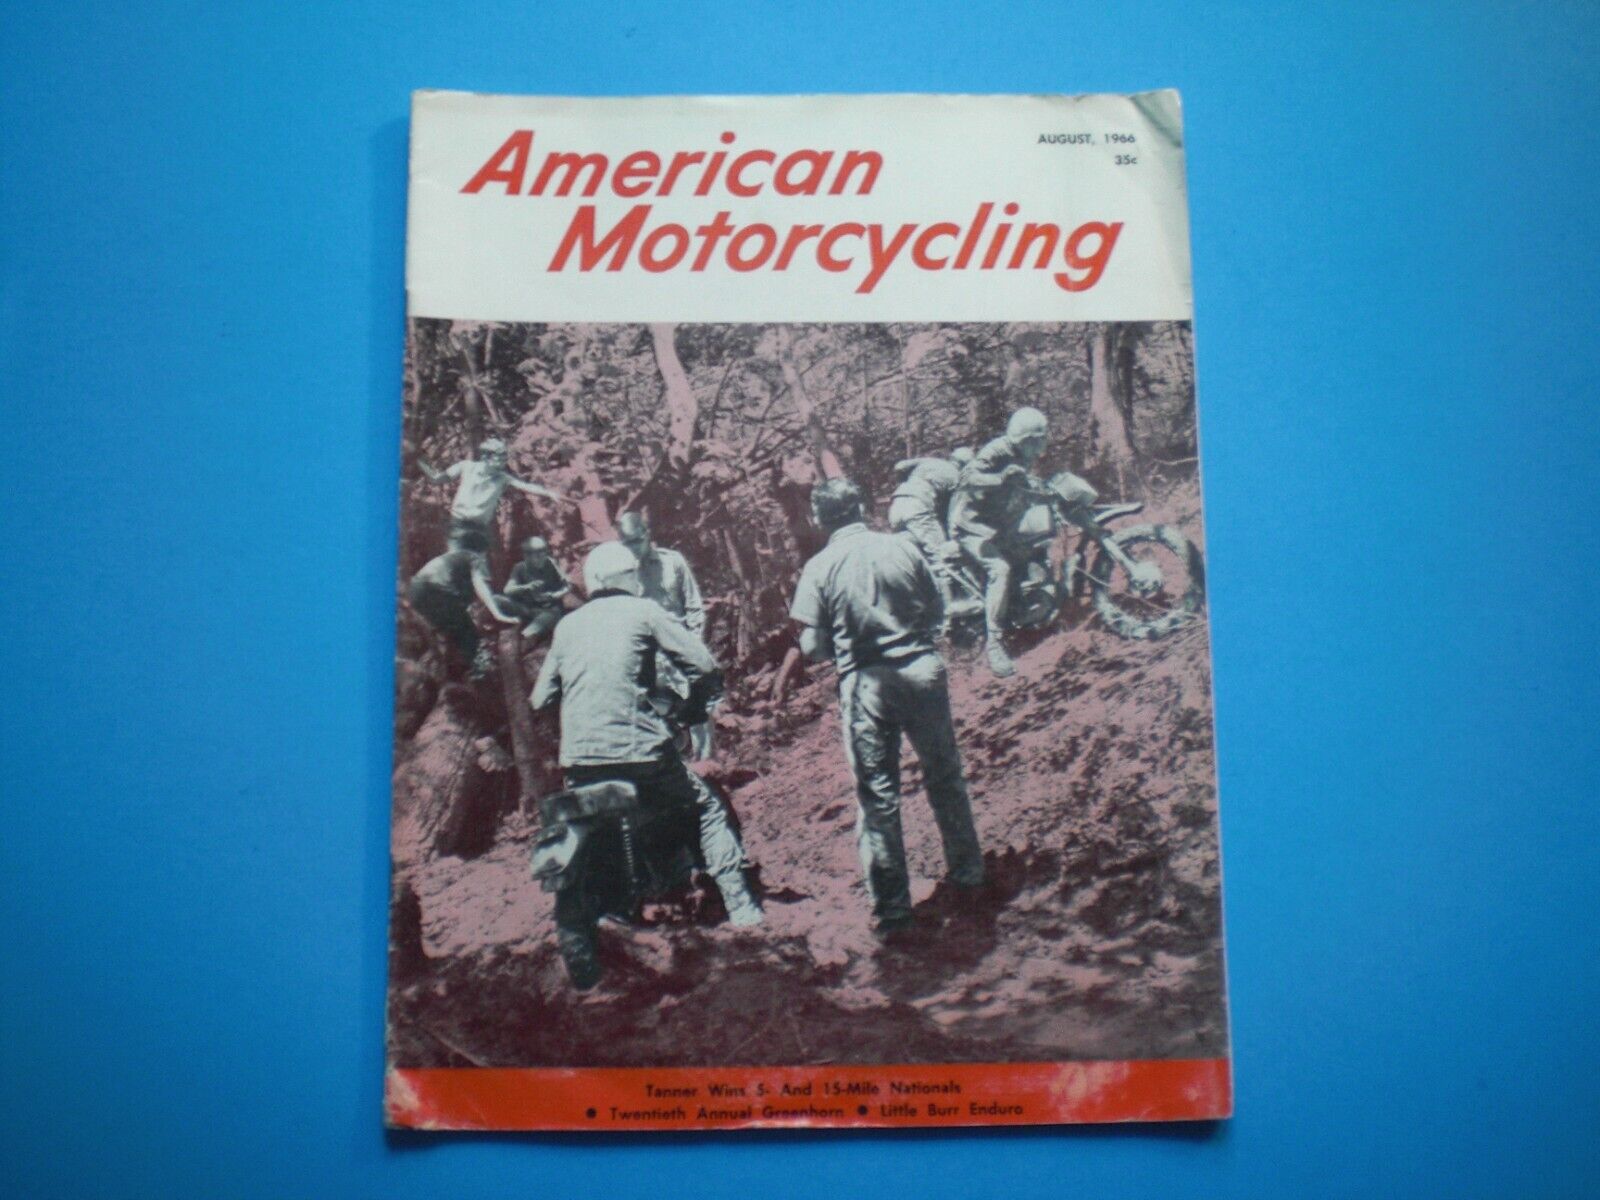 American Motorcycling Magazine August 1966 - Sammy Tanner Vintage BSA Motorcycle